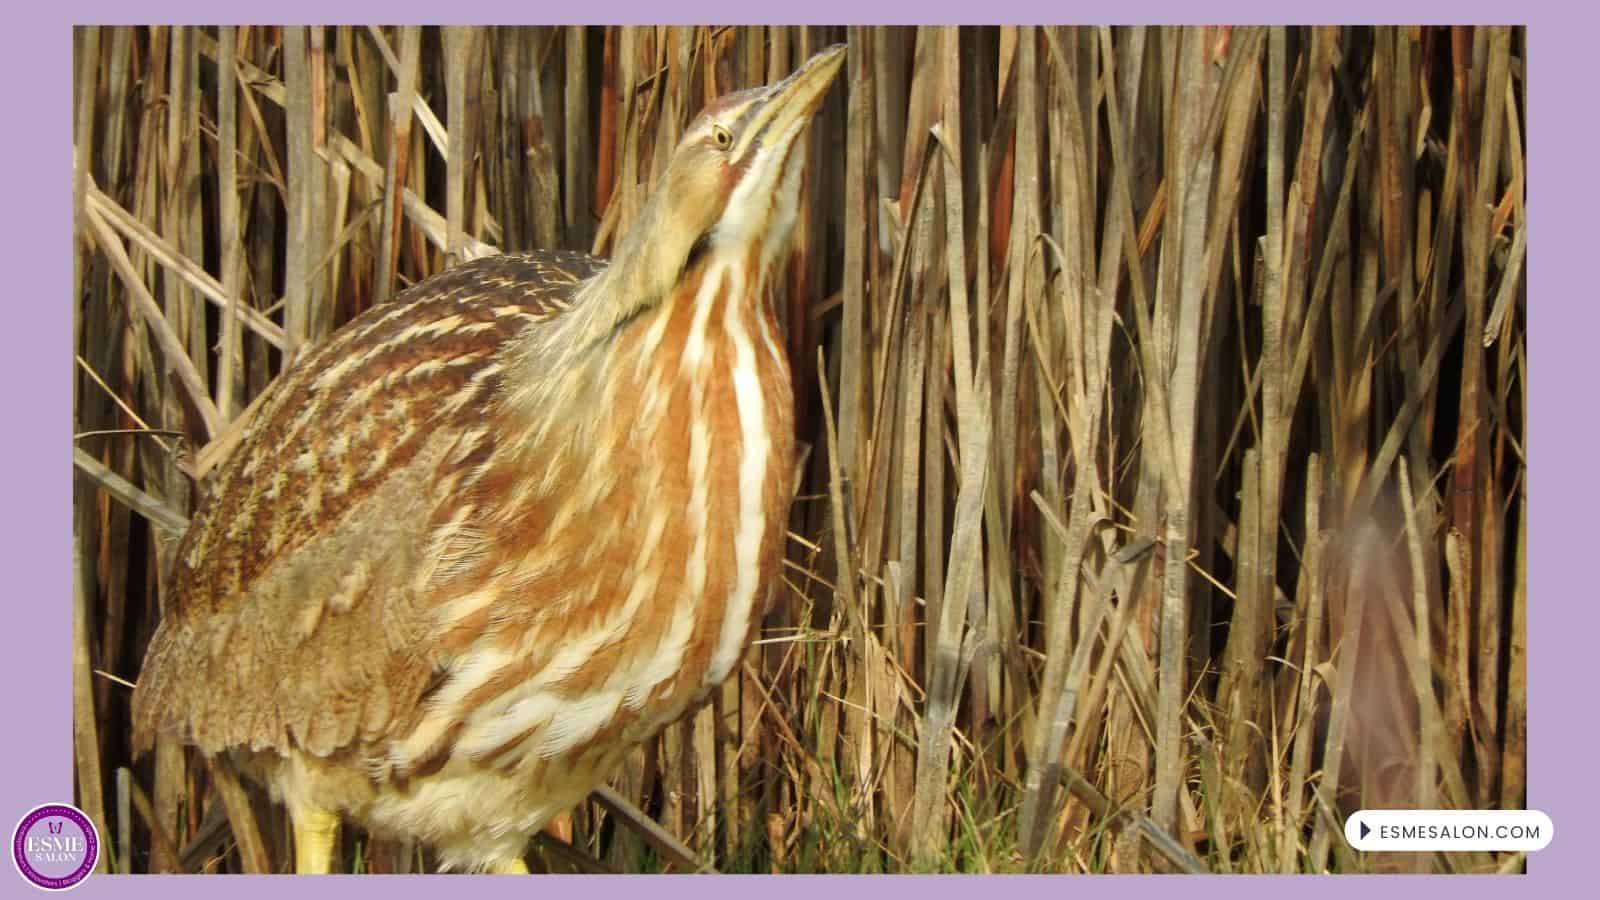 an image of an American bittern standing within the reeds